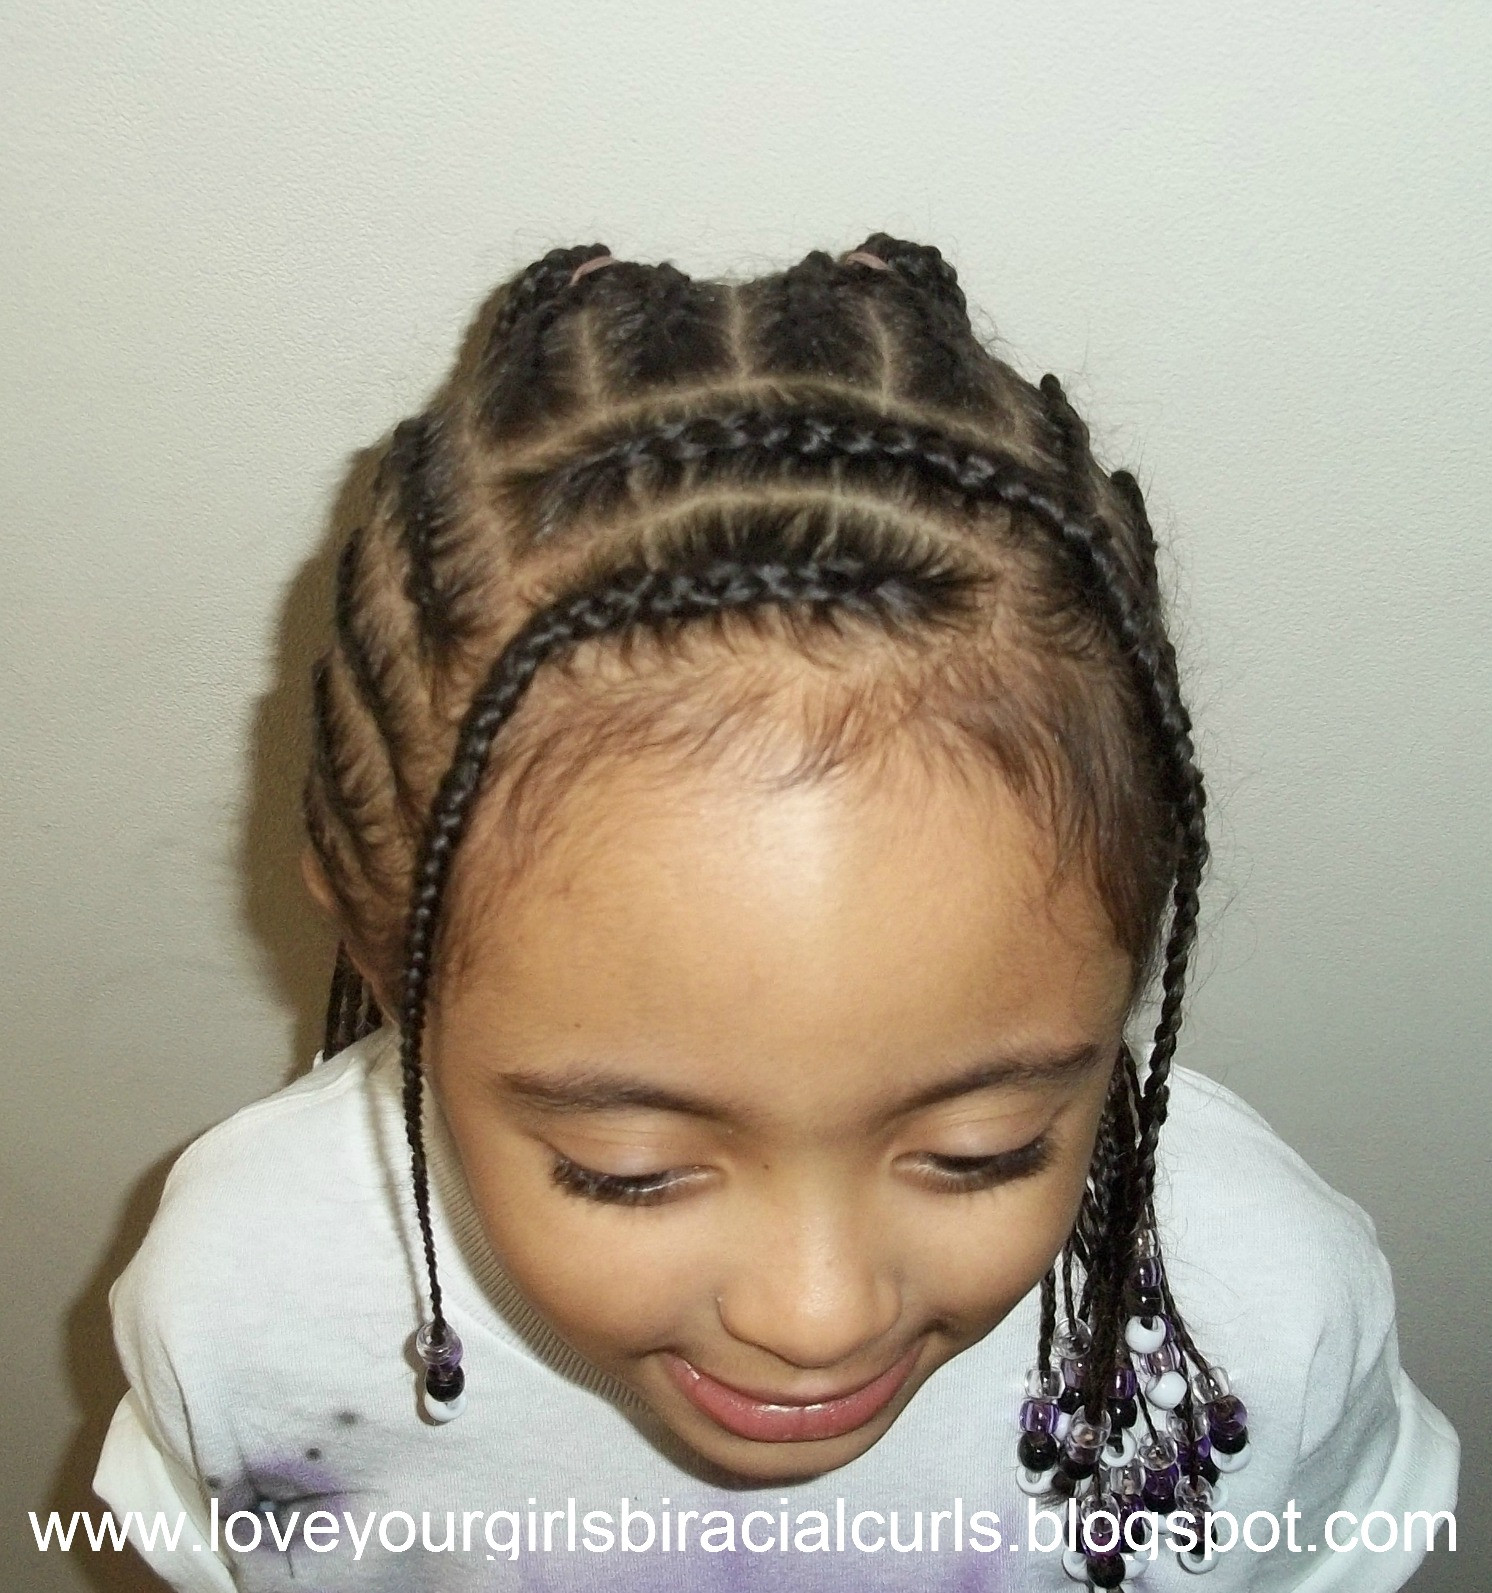 Biracial Little Girl Hairstyles
 Love Your Girls Biracial Curls Diva R s Hairstyle from